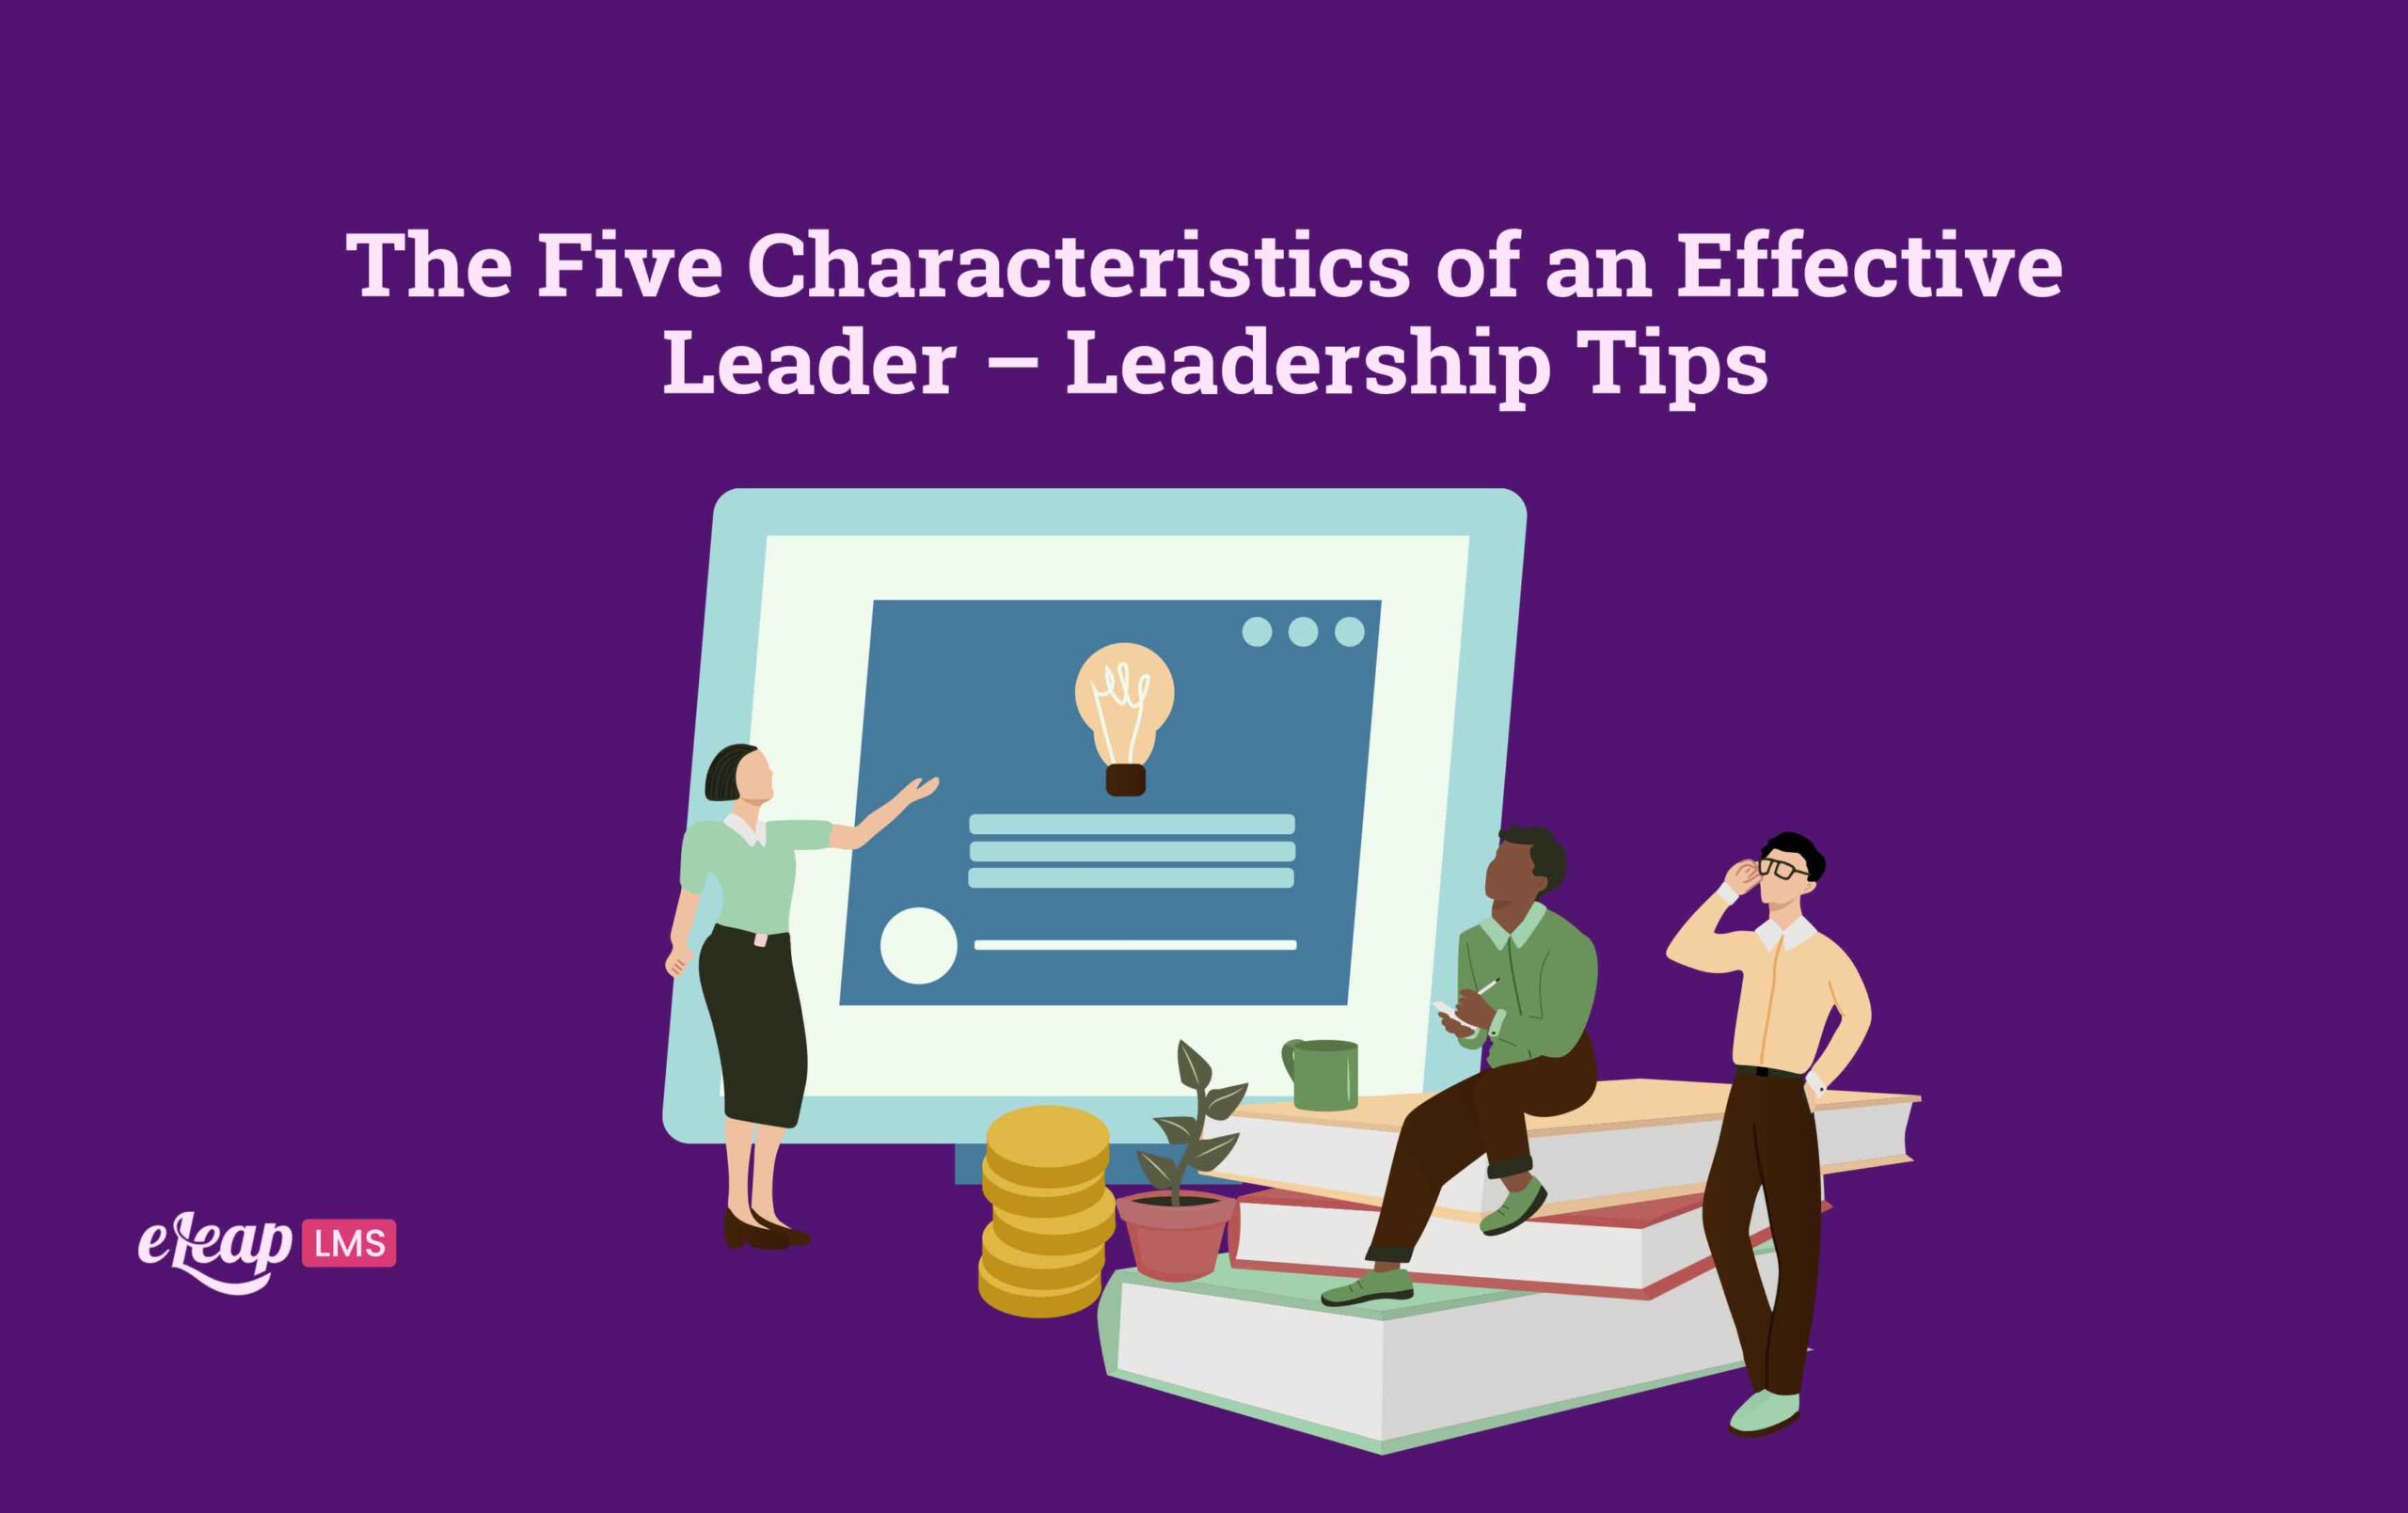 The Five Characteristics of an Effective Leader - Leadership Tips